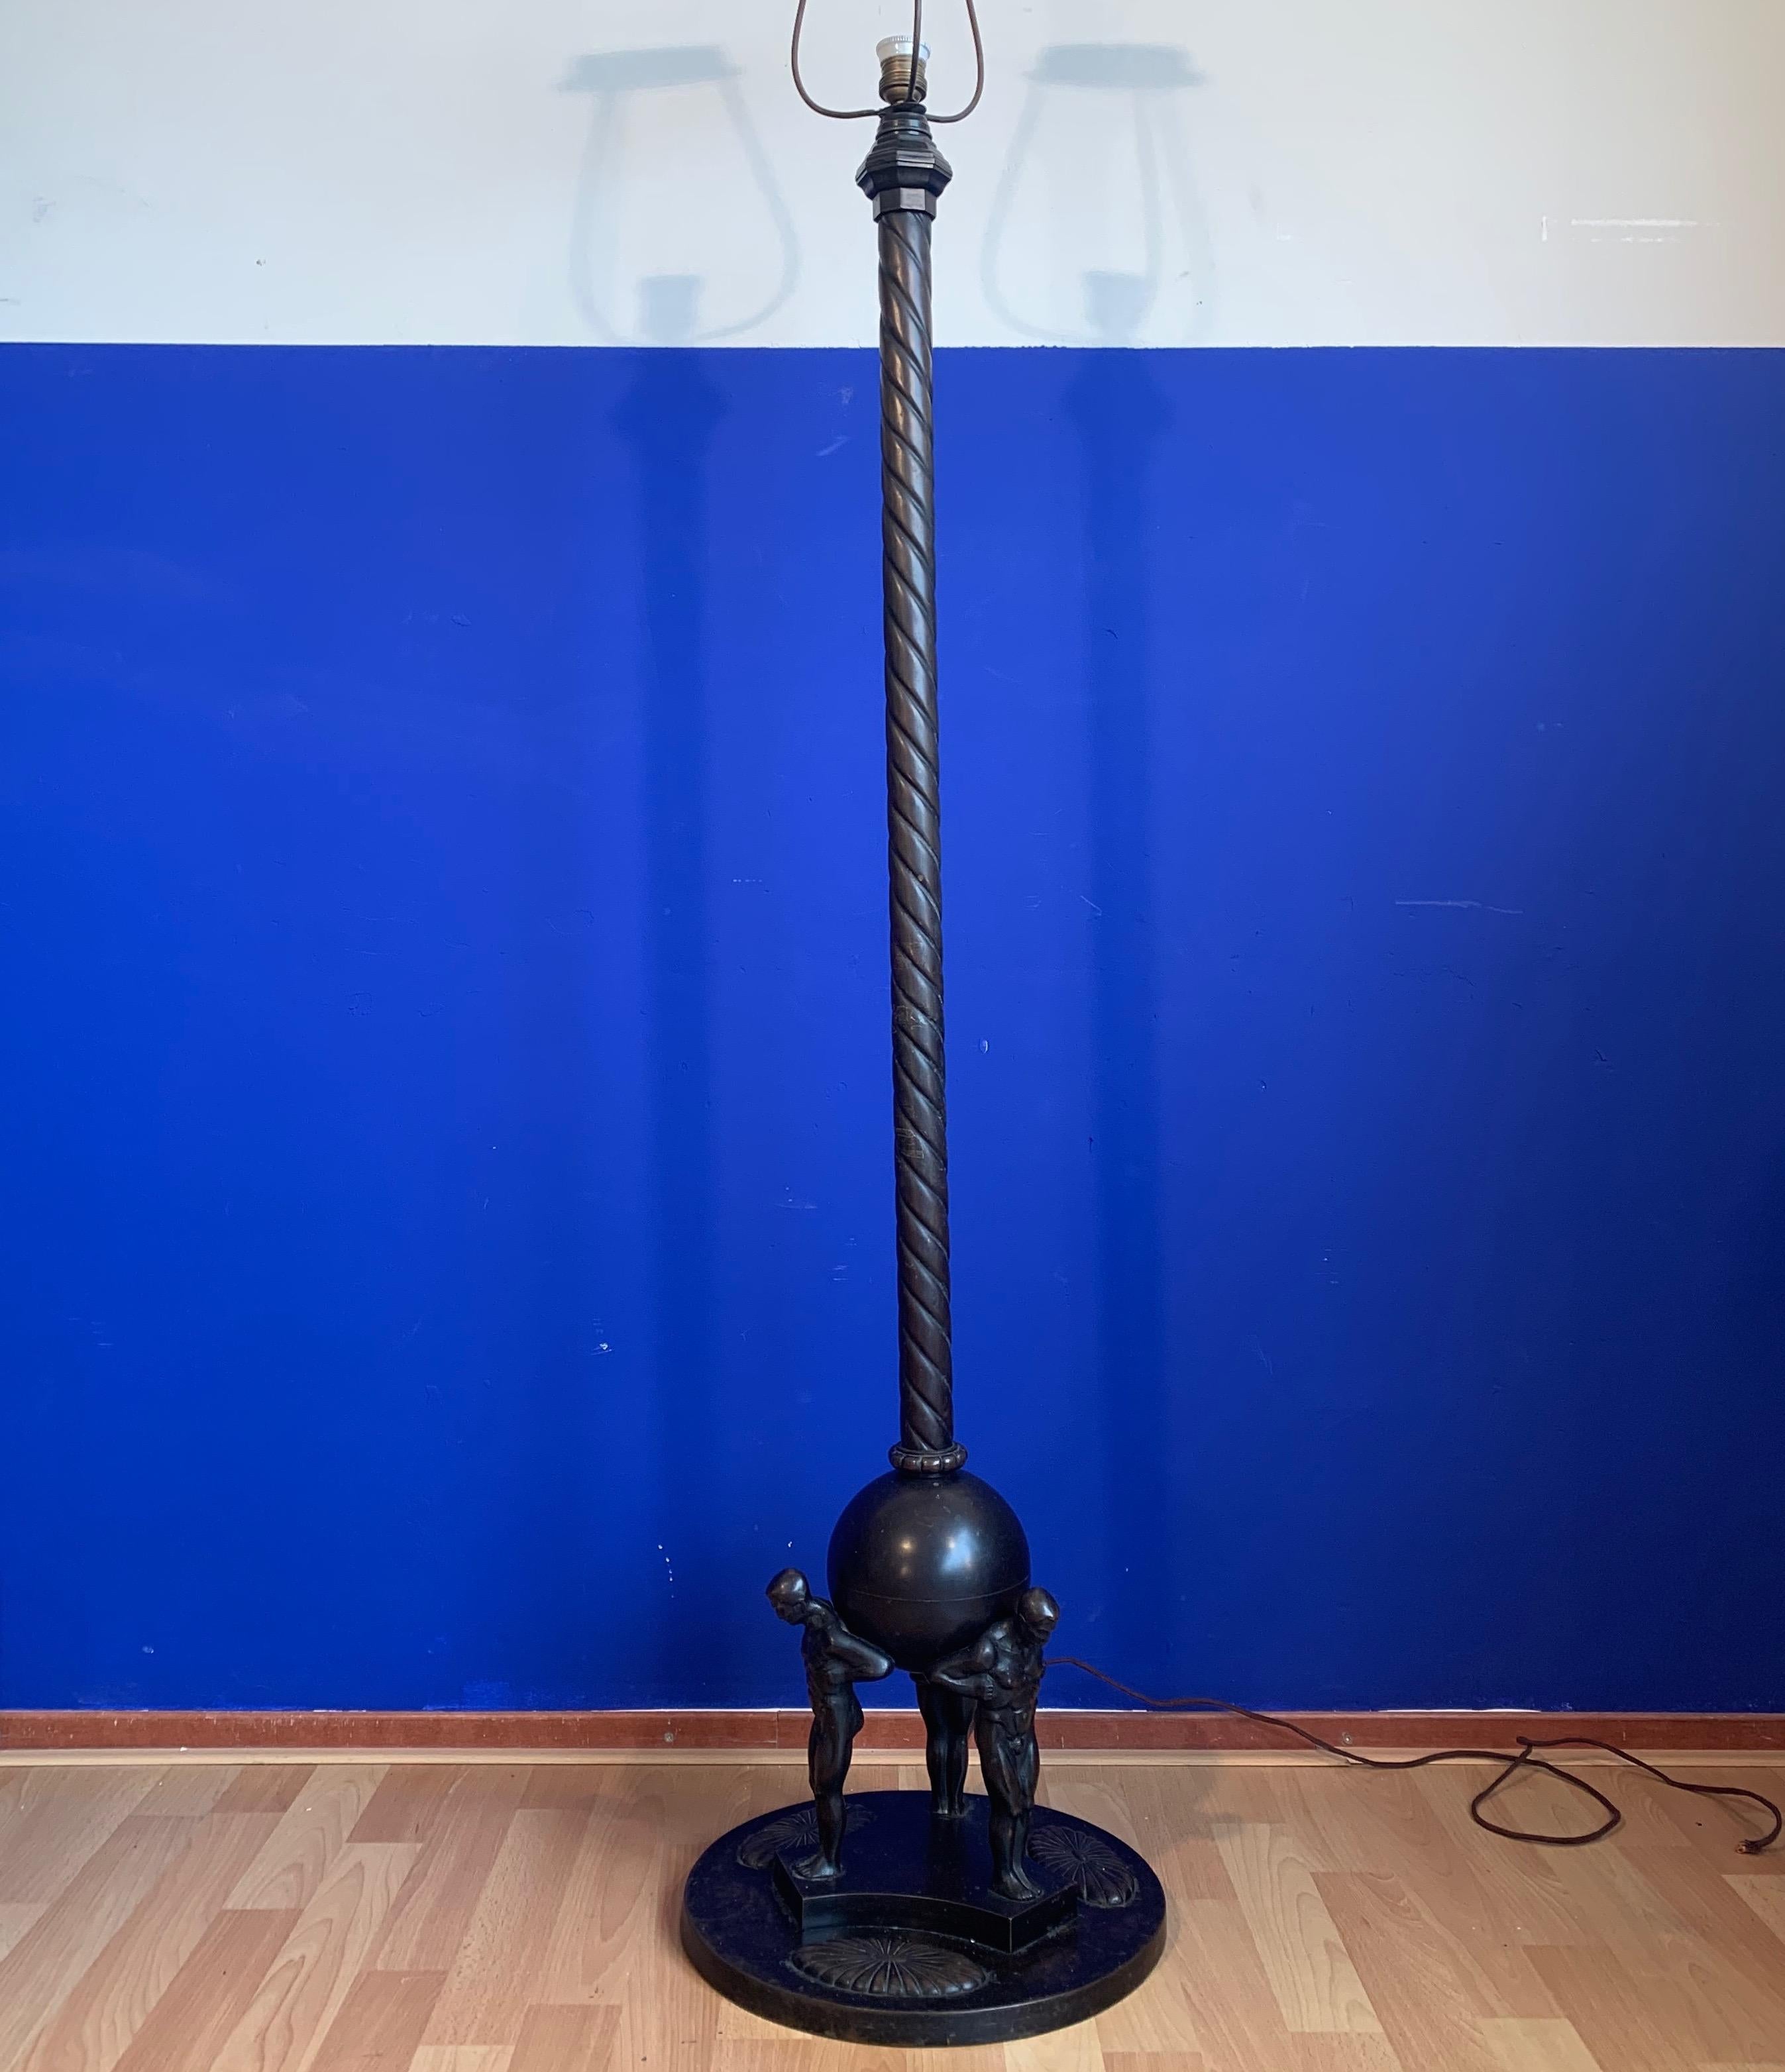 Beautiful and rare Art Deco / Jugendstil floor lamp with cast bronze atlas style pose Male sculptures.

This impressive and highly decorative floor lamp dates from 1910-1920.
It has a wonderful patina and this artistically daring design with